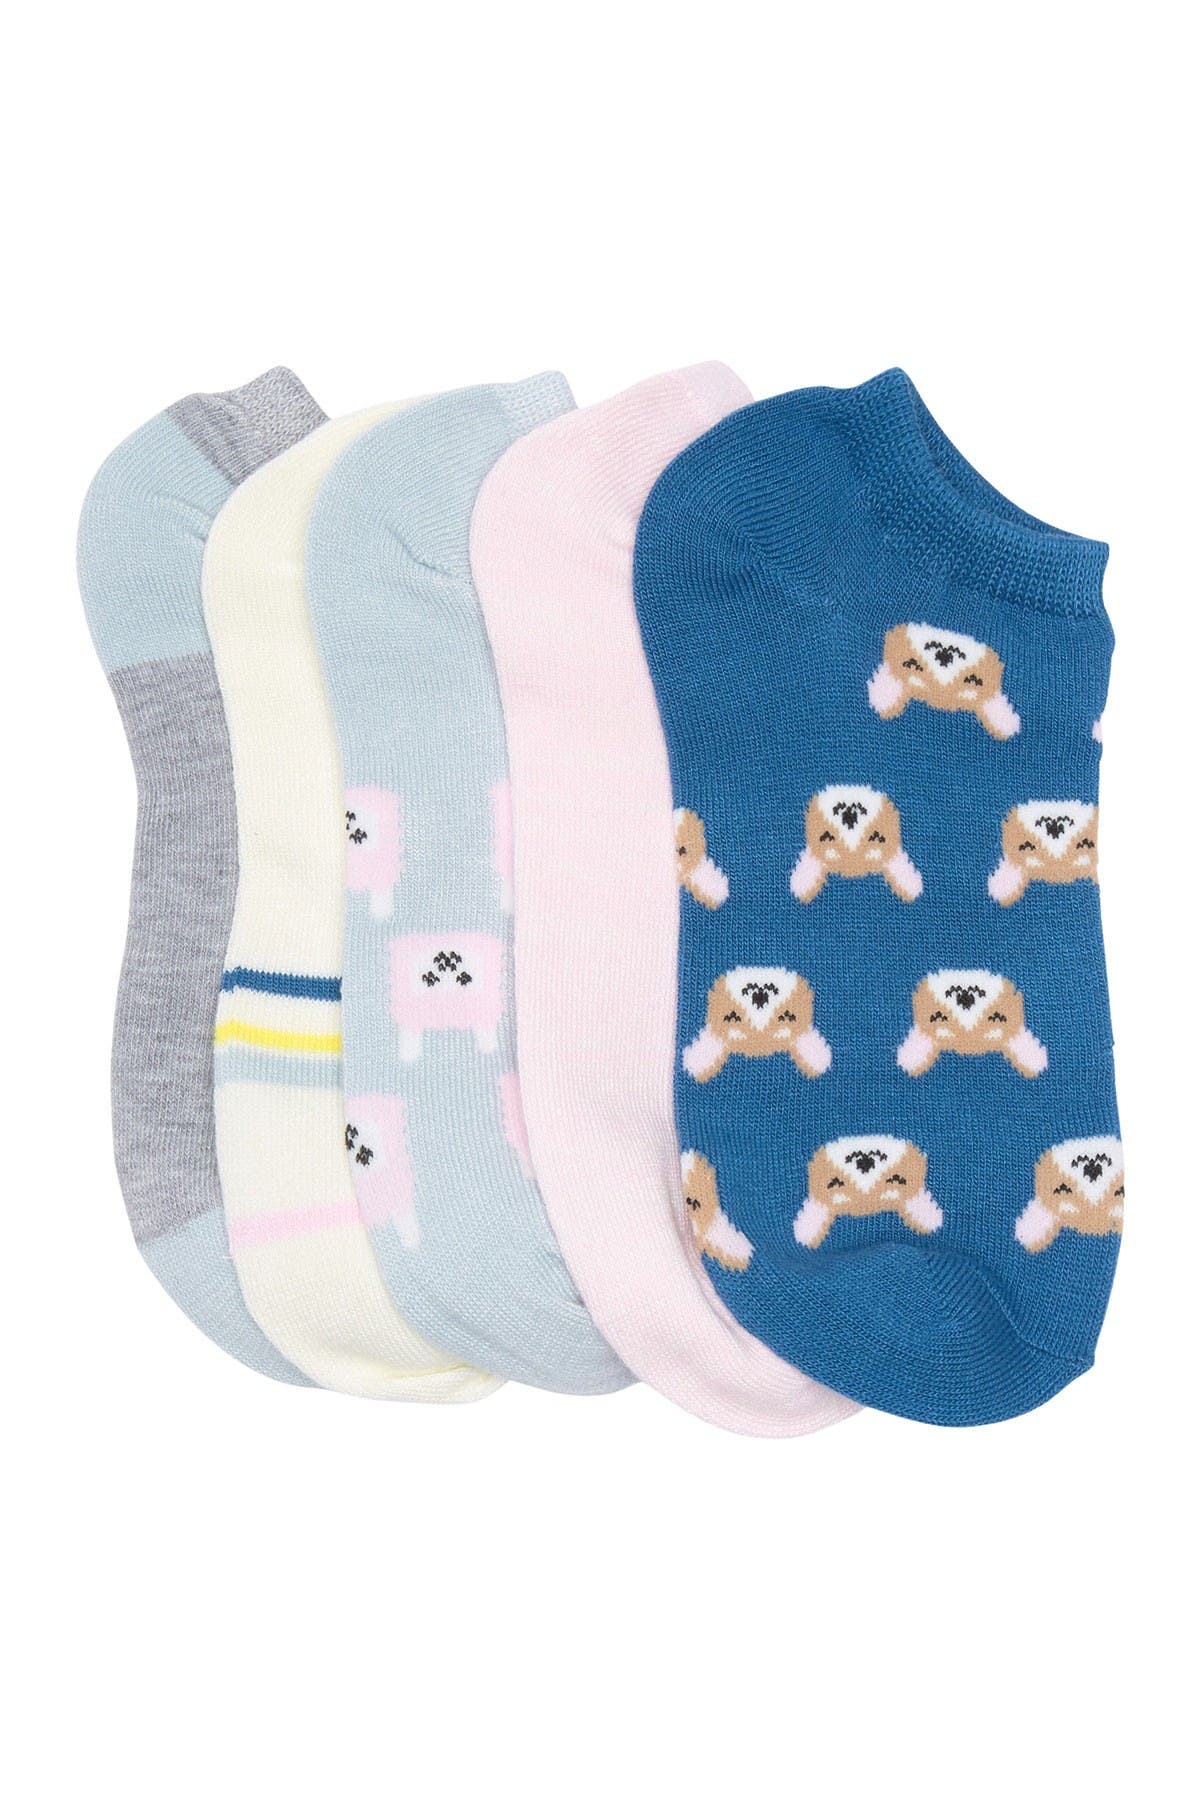 Abound Fun Ankle Socks In Grey Heather Animal Faces